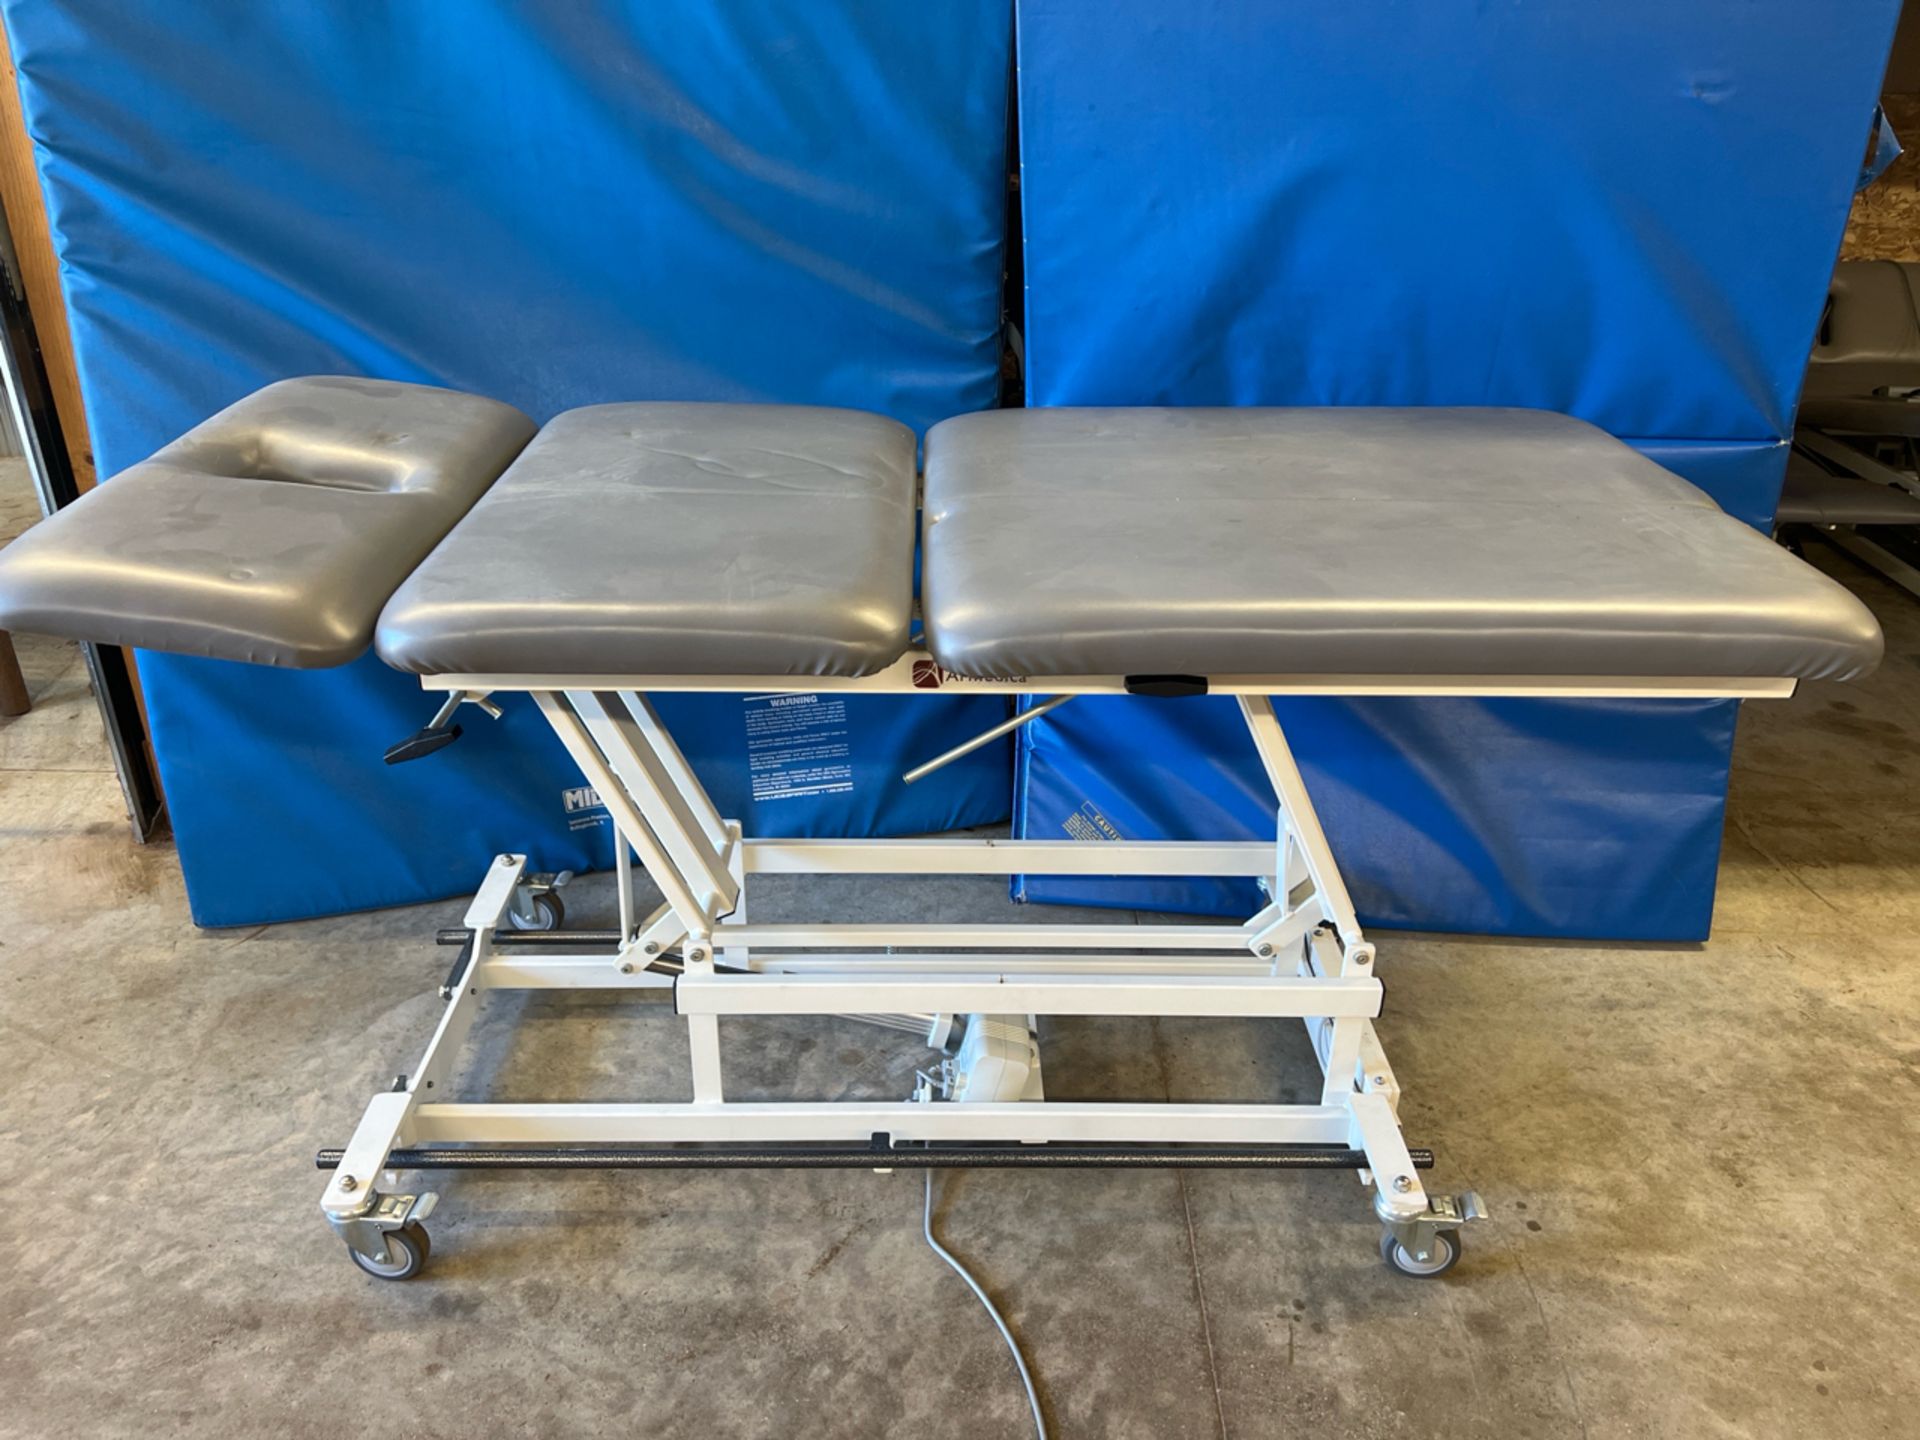 PERFORMA 81529030 POWER THERAPY TABLE WITH INTEGRATED FOOT CONTROL - Image 2 of 3